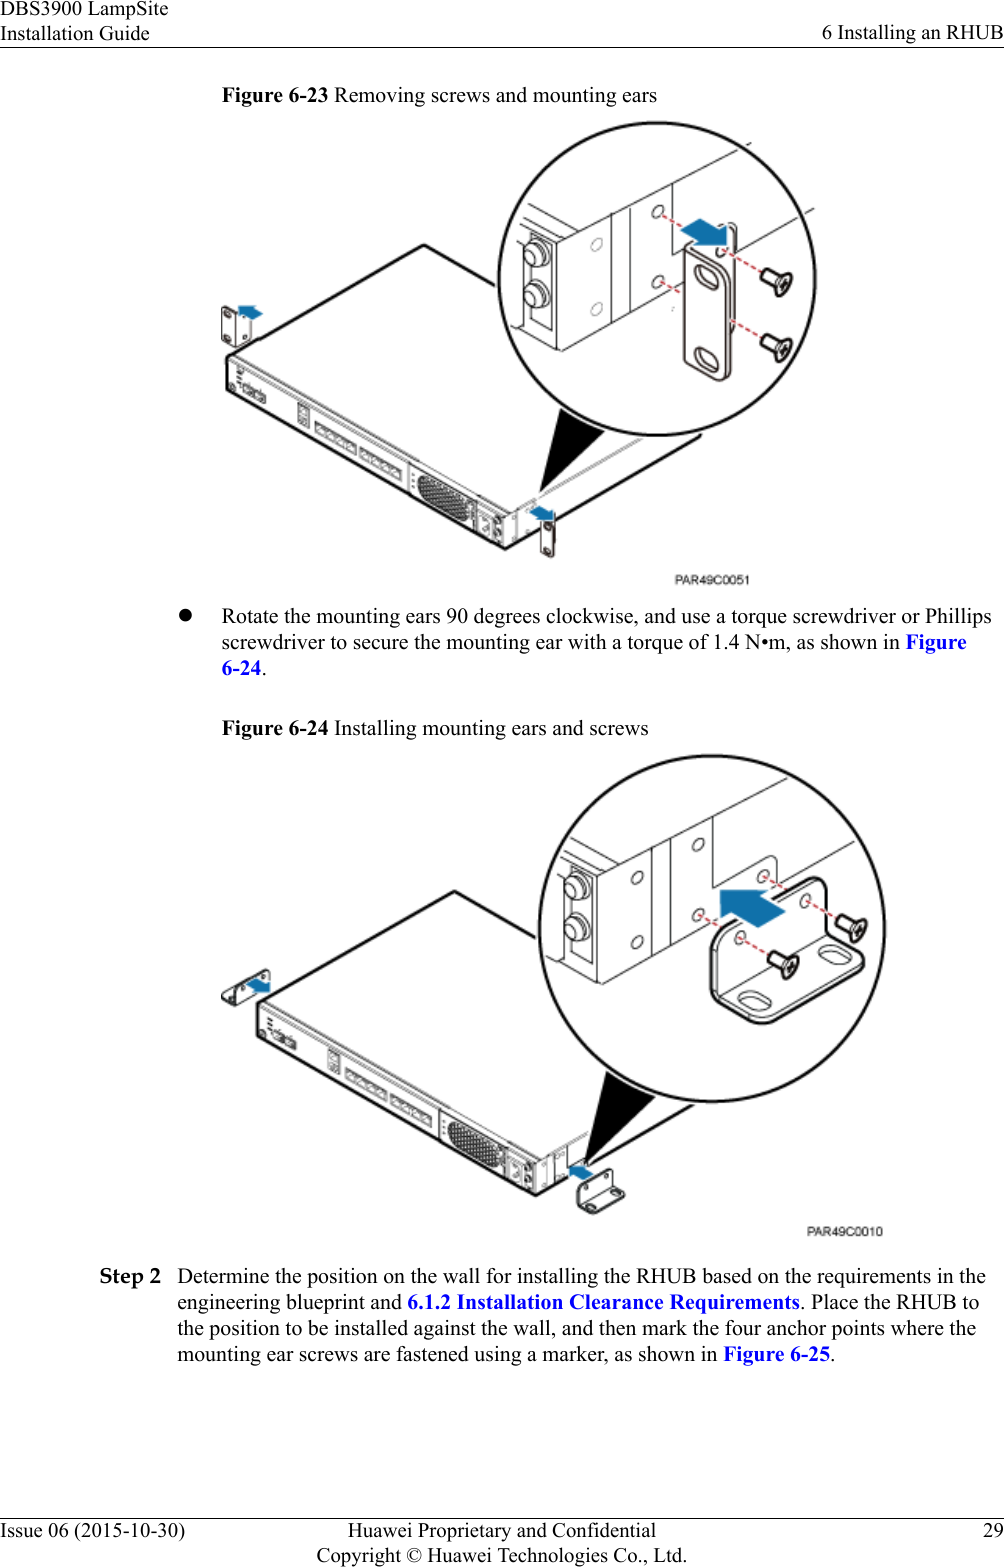 Figure 6-23 Removing screws and mounting earslRotate the mounting ears 90 degrees clockwise, and use a torque screwdriver or Phillipsscrewdriver to secure the mounting ear with a torque of 1.4 N•m, as shown in Figure6-24.Figure 6-24 Installing mounting ears and screwsStep 2 Determine the position on the wall for installing the RHUB based on the requirements in theengineering blueprint and 6.1.2 Installation Clearance Requirements. Place the RHUB tothe position to be installed against the wall, and then mark the four anchor points where themounting ear screws are fastened using a marker, as shown in Figure 6-25.DBS3900 LampSiteInstallation Guide 6 Installing an RHUBIssue 06 (2015-10-30) Huawei Proprietary and ConfidentialCopyright © Huawei Technologies Co., Ltd.29